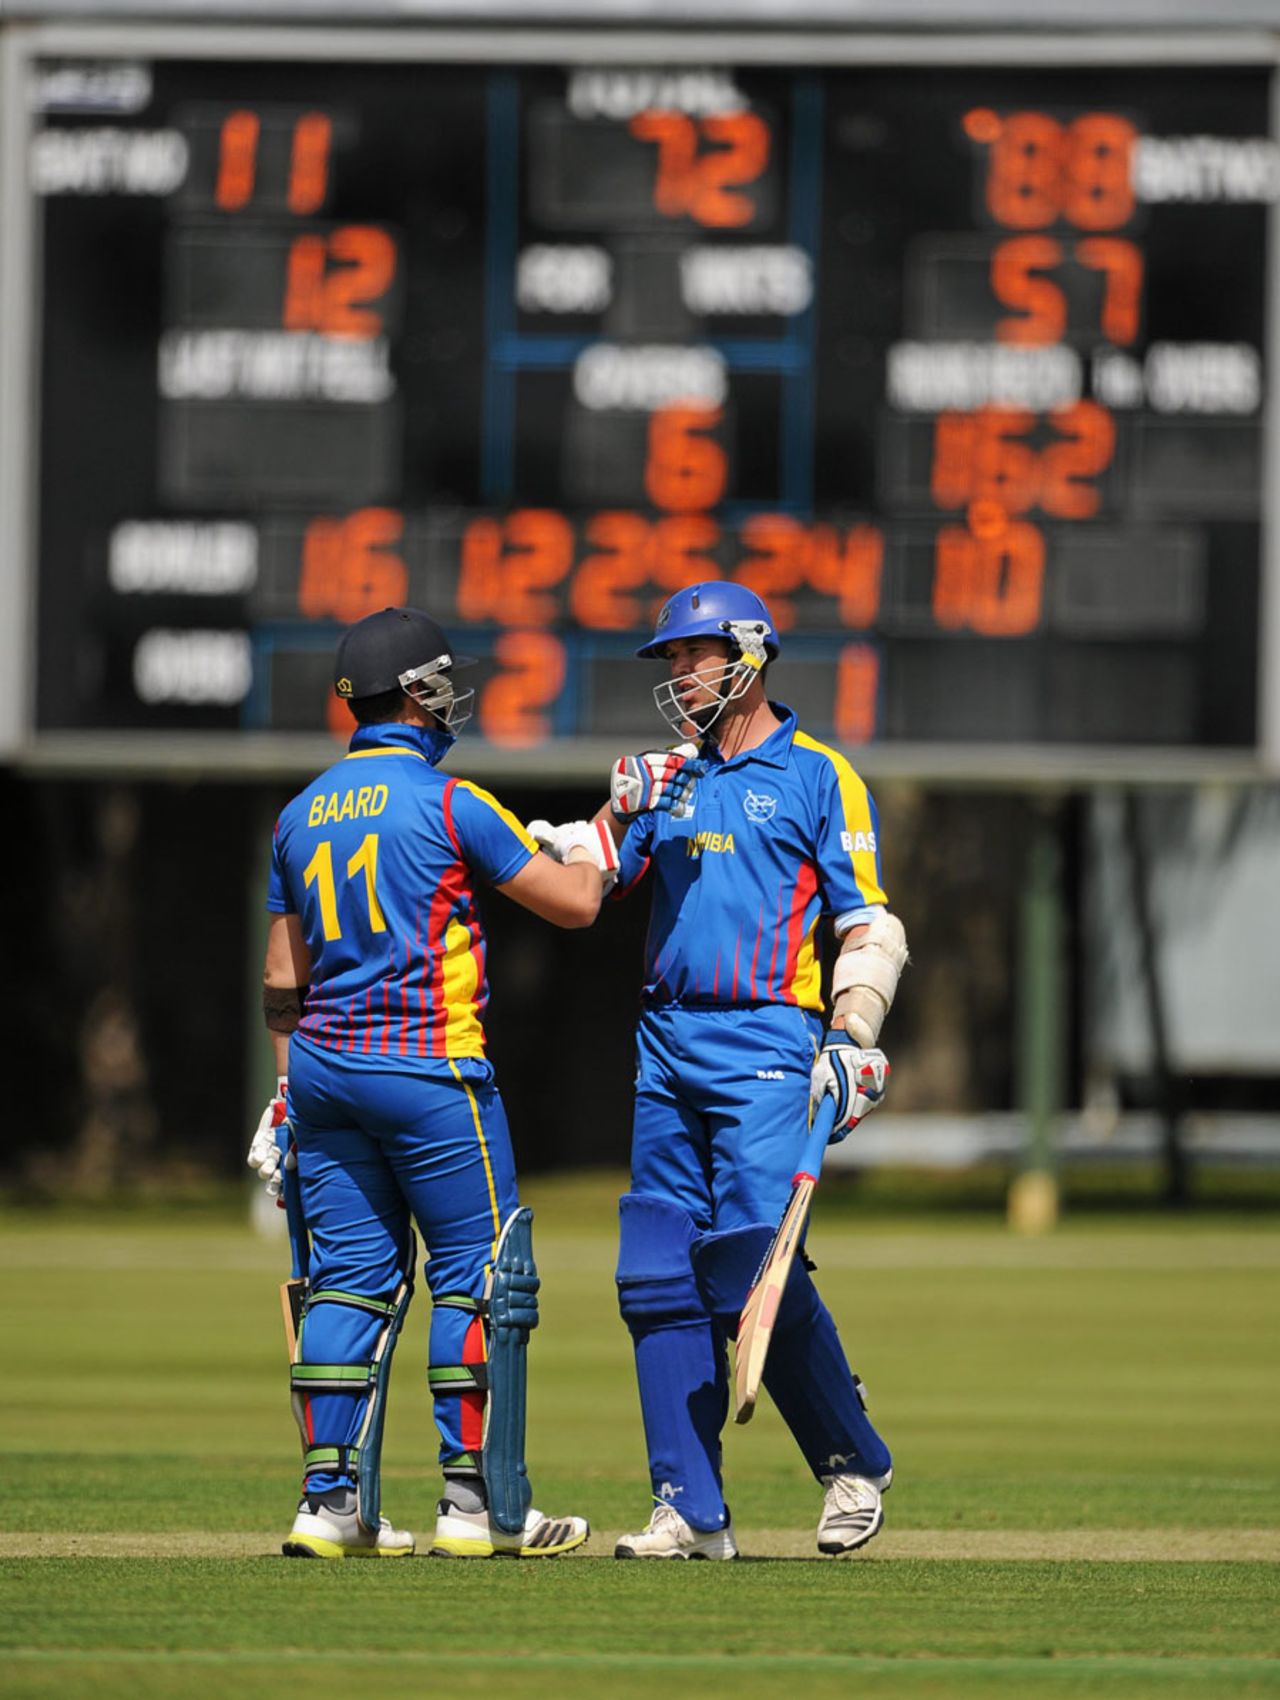 Stephan Baard and Gerrie Snyman shared a 121-run opening stand, Jersey v Namibia, World T20 Qualifier, July 17, 2015